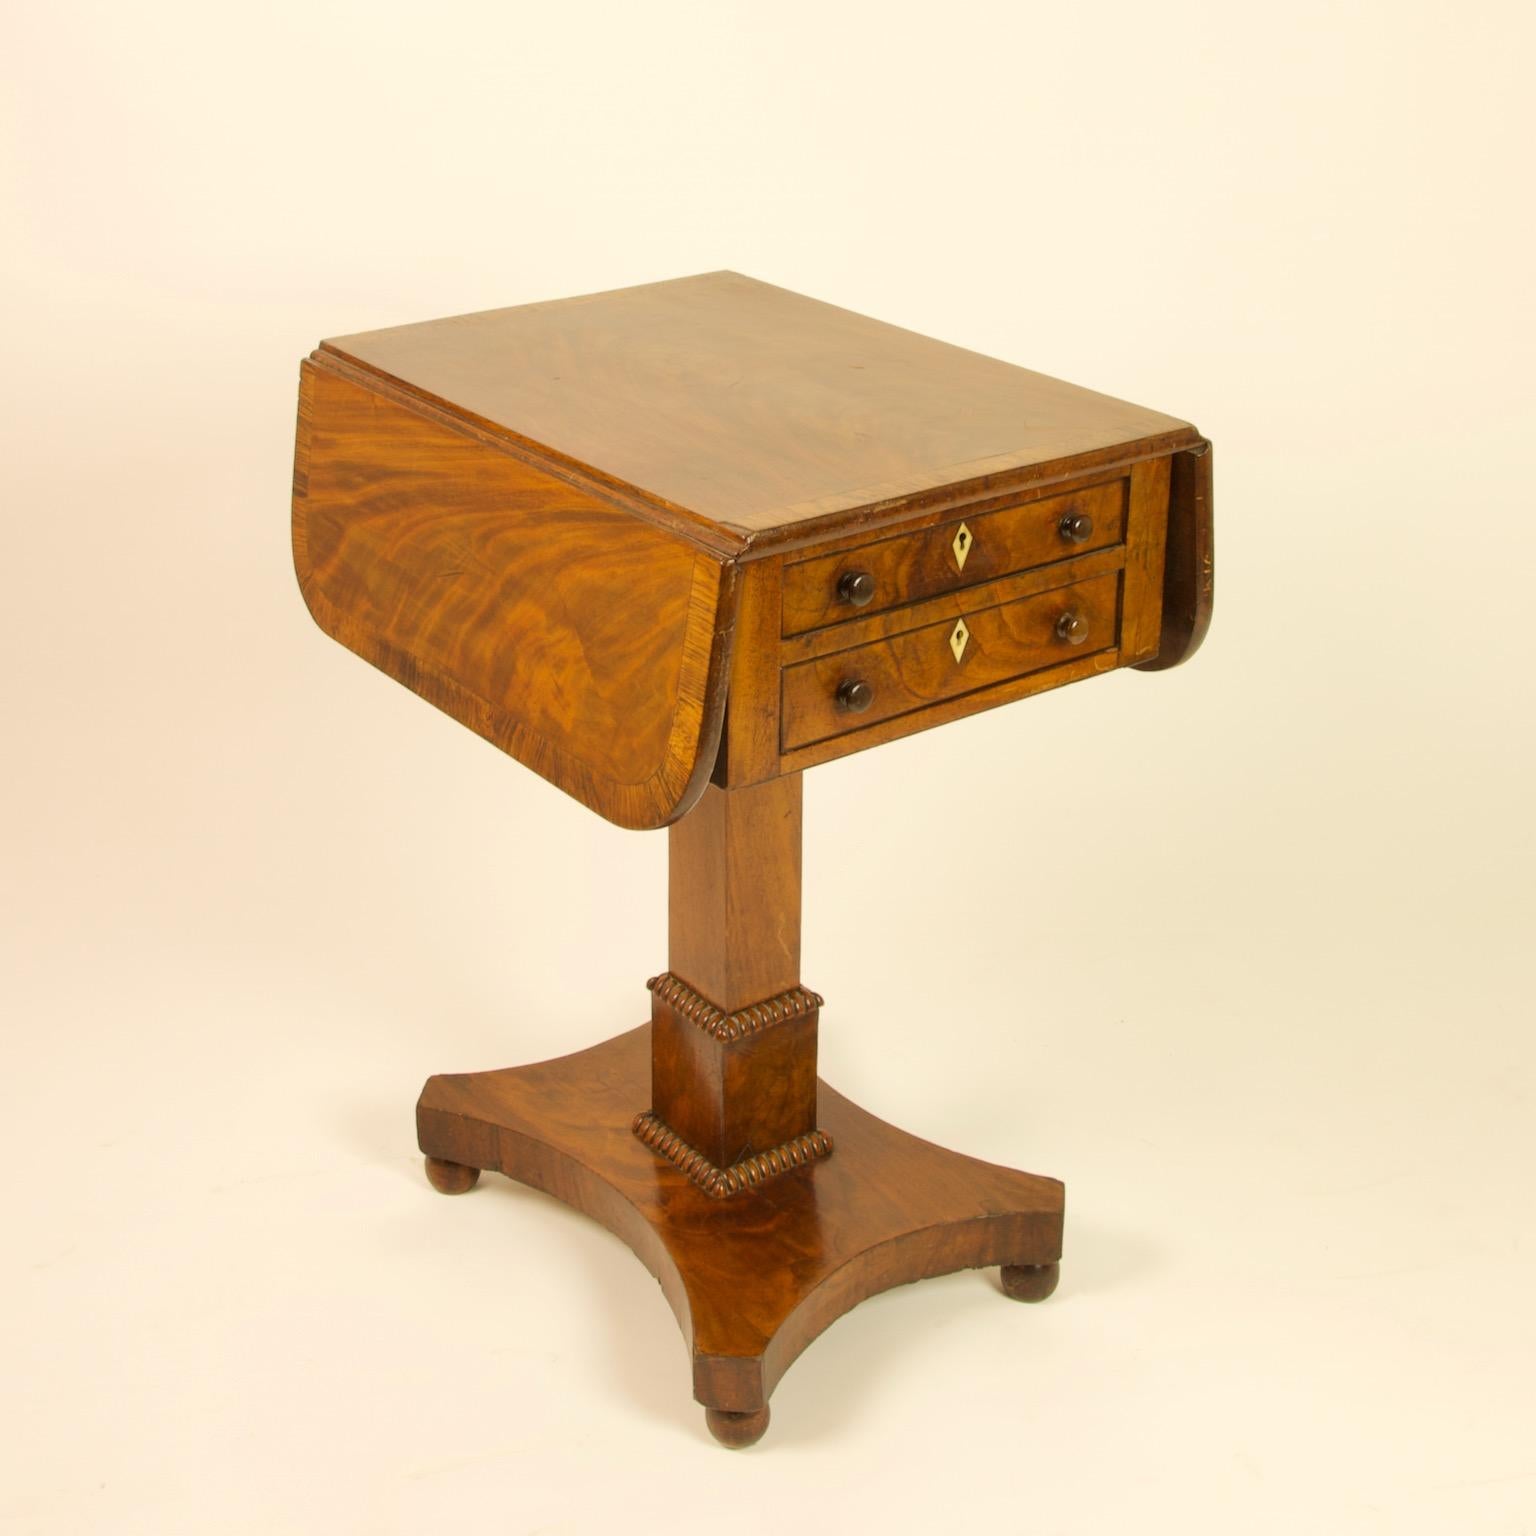 19th century English Regency mahogany small pembroke or drop-leaf side table

Small Regency small Pembroke or drop leaf table in mahogany, having a two flap top above two string inlaid drawers and two dummy drawers to back, all fitted with wooden